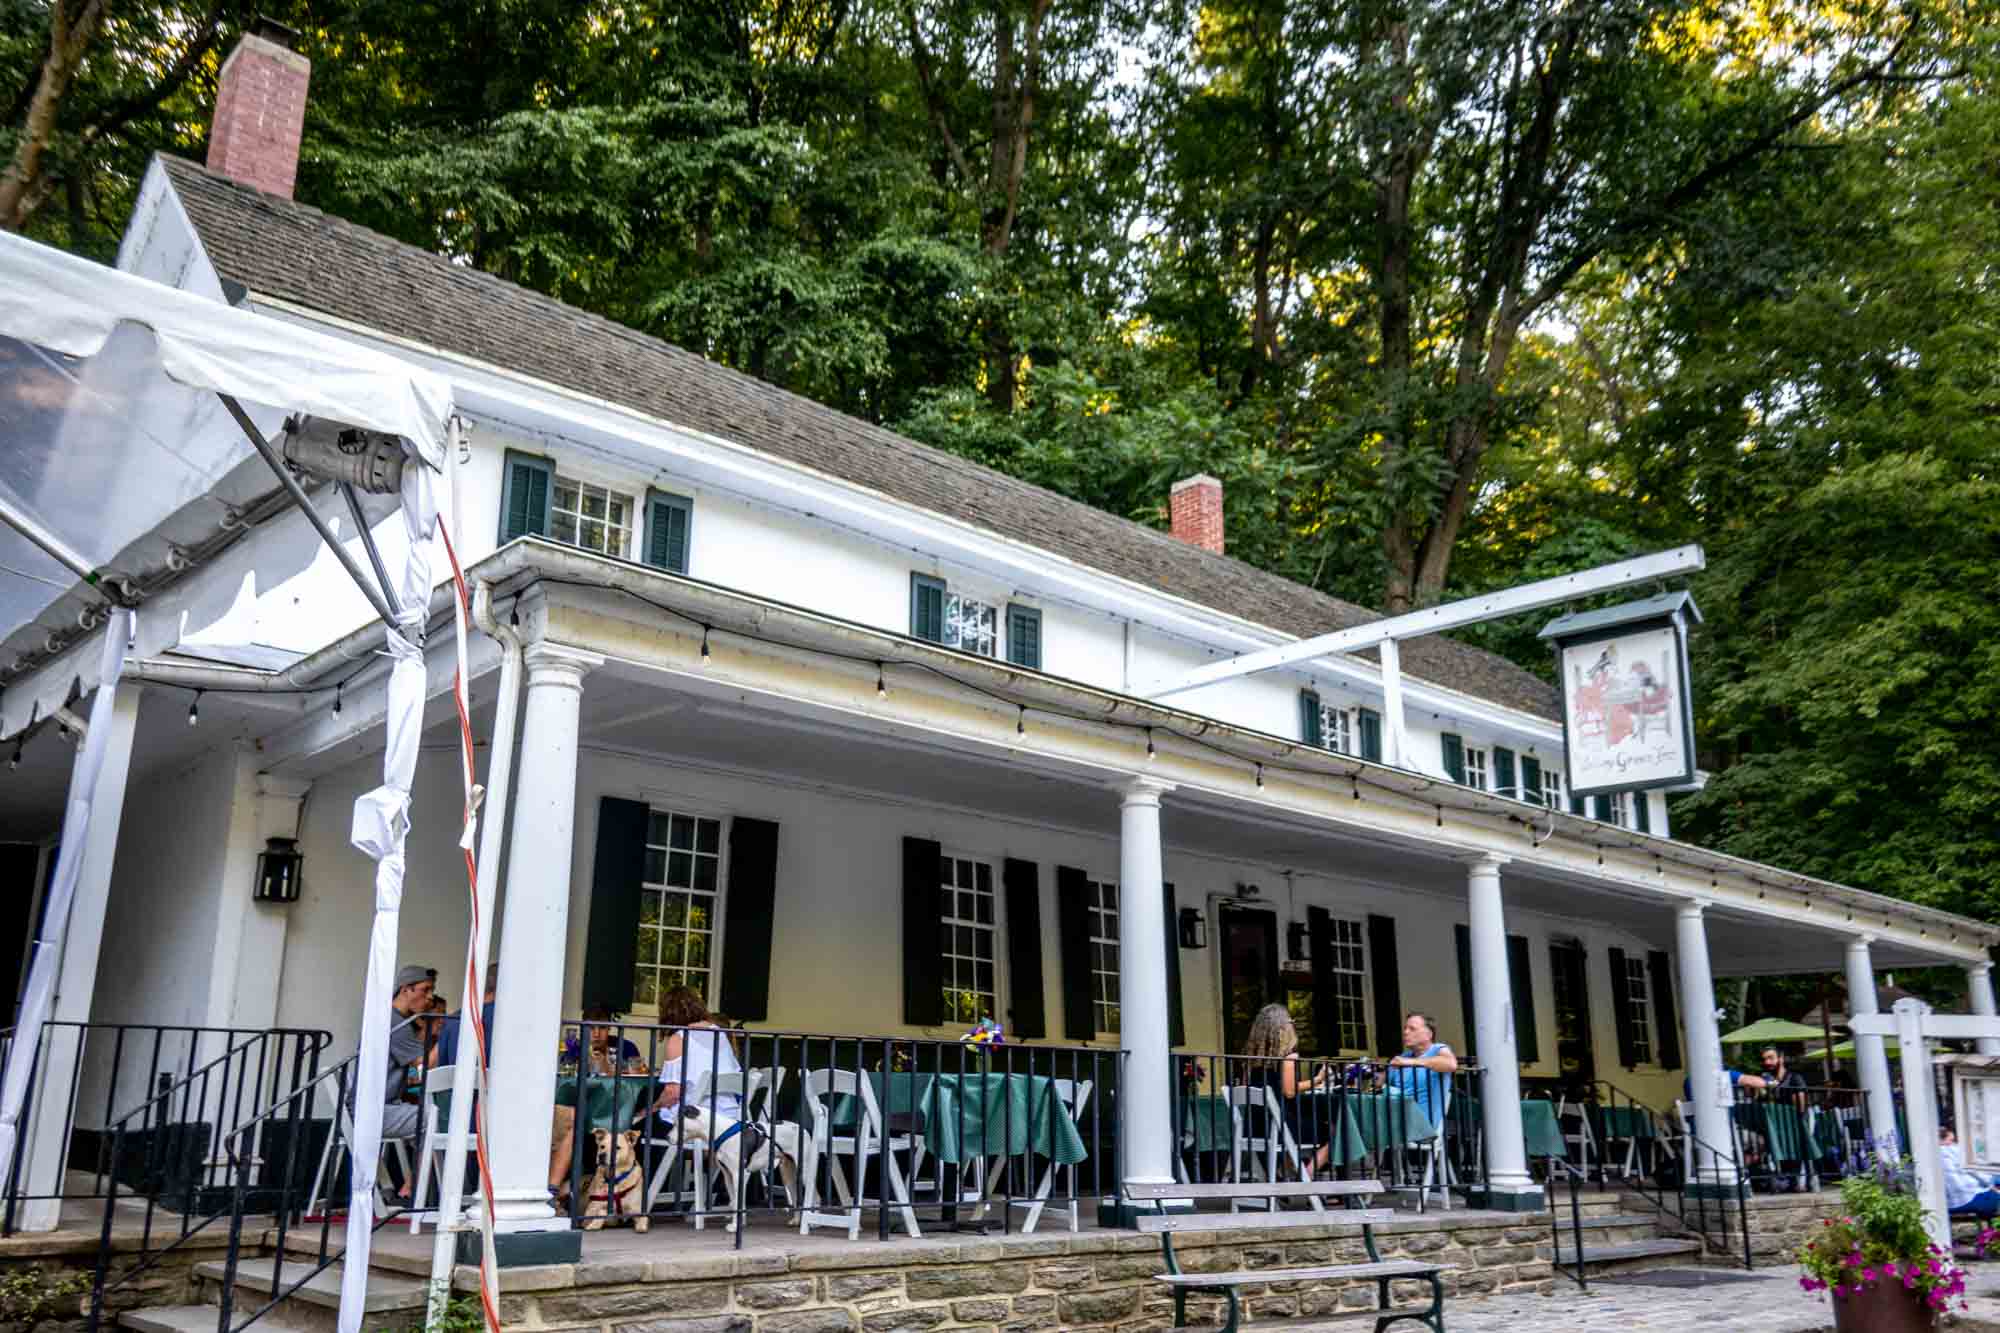 People seated at tables on the patio of an historic inn